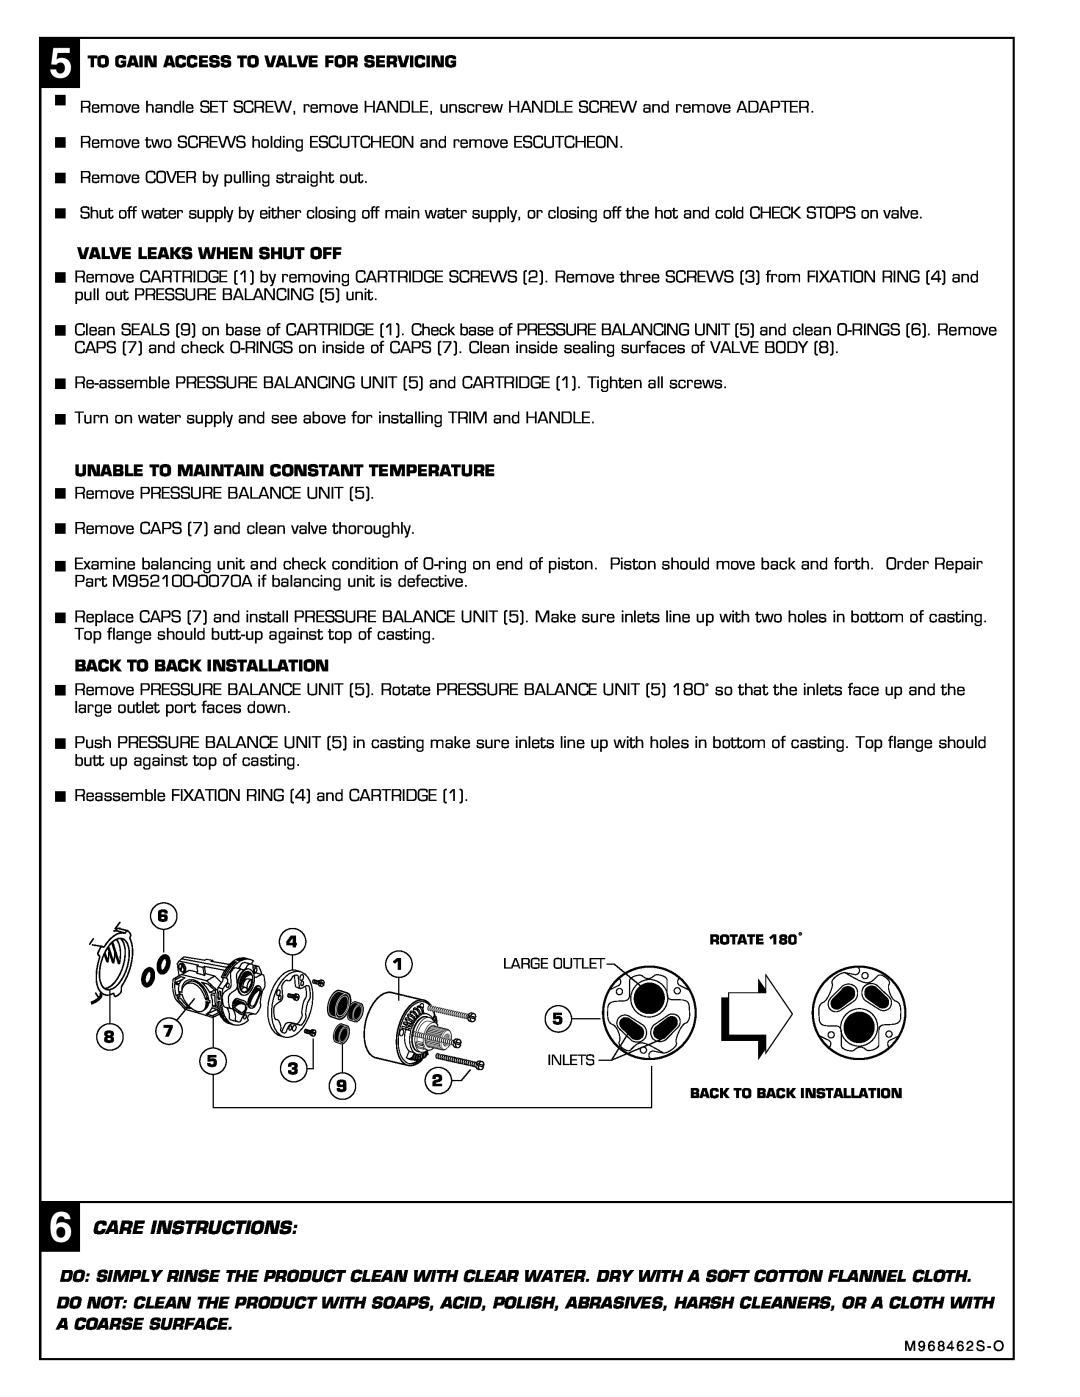 American Standard 6012, 6011 Care Instructions, To Gain Access To Valve For Servicing, Valve Leaks When Shut Off 